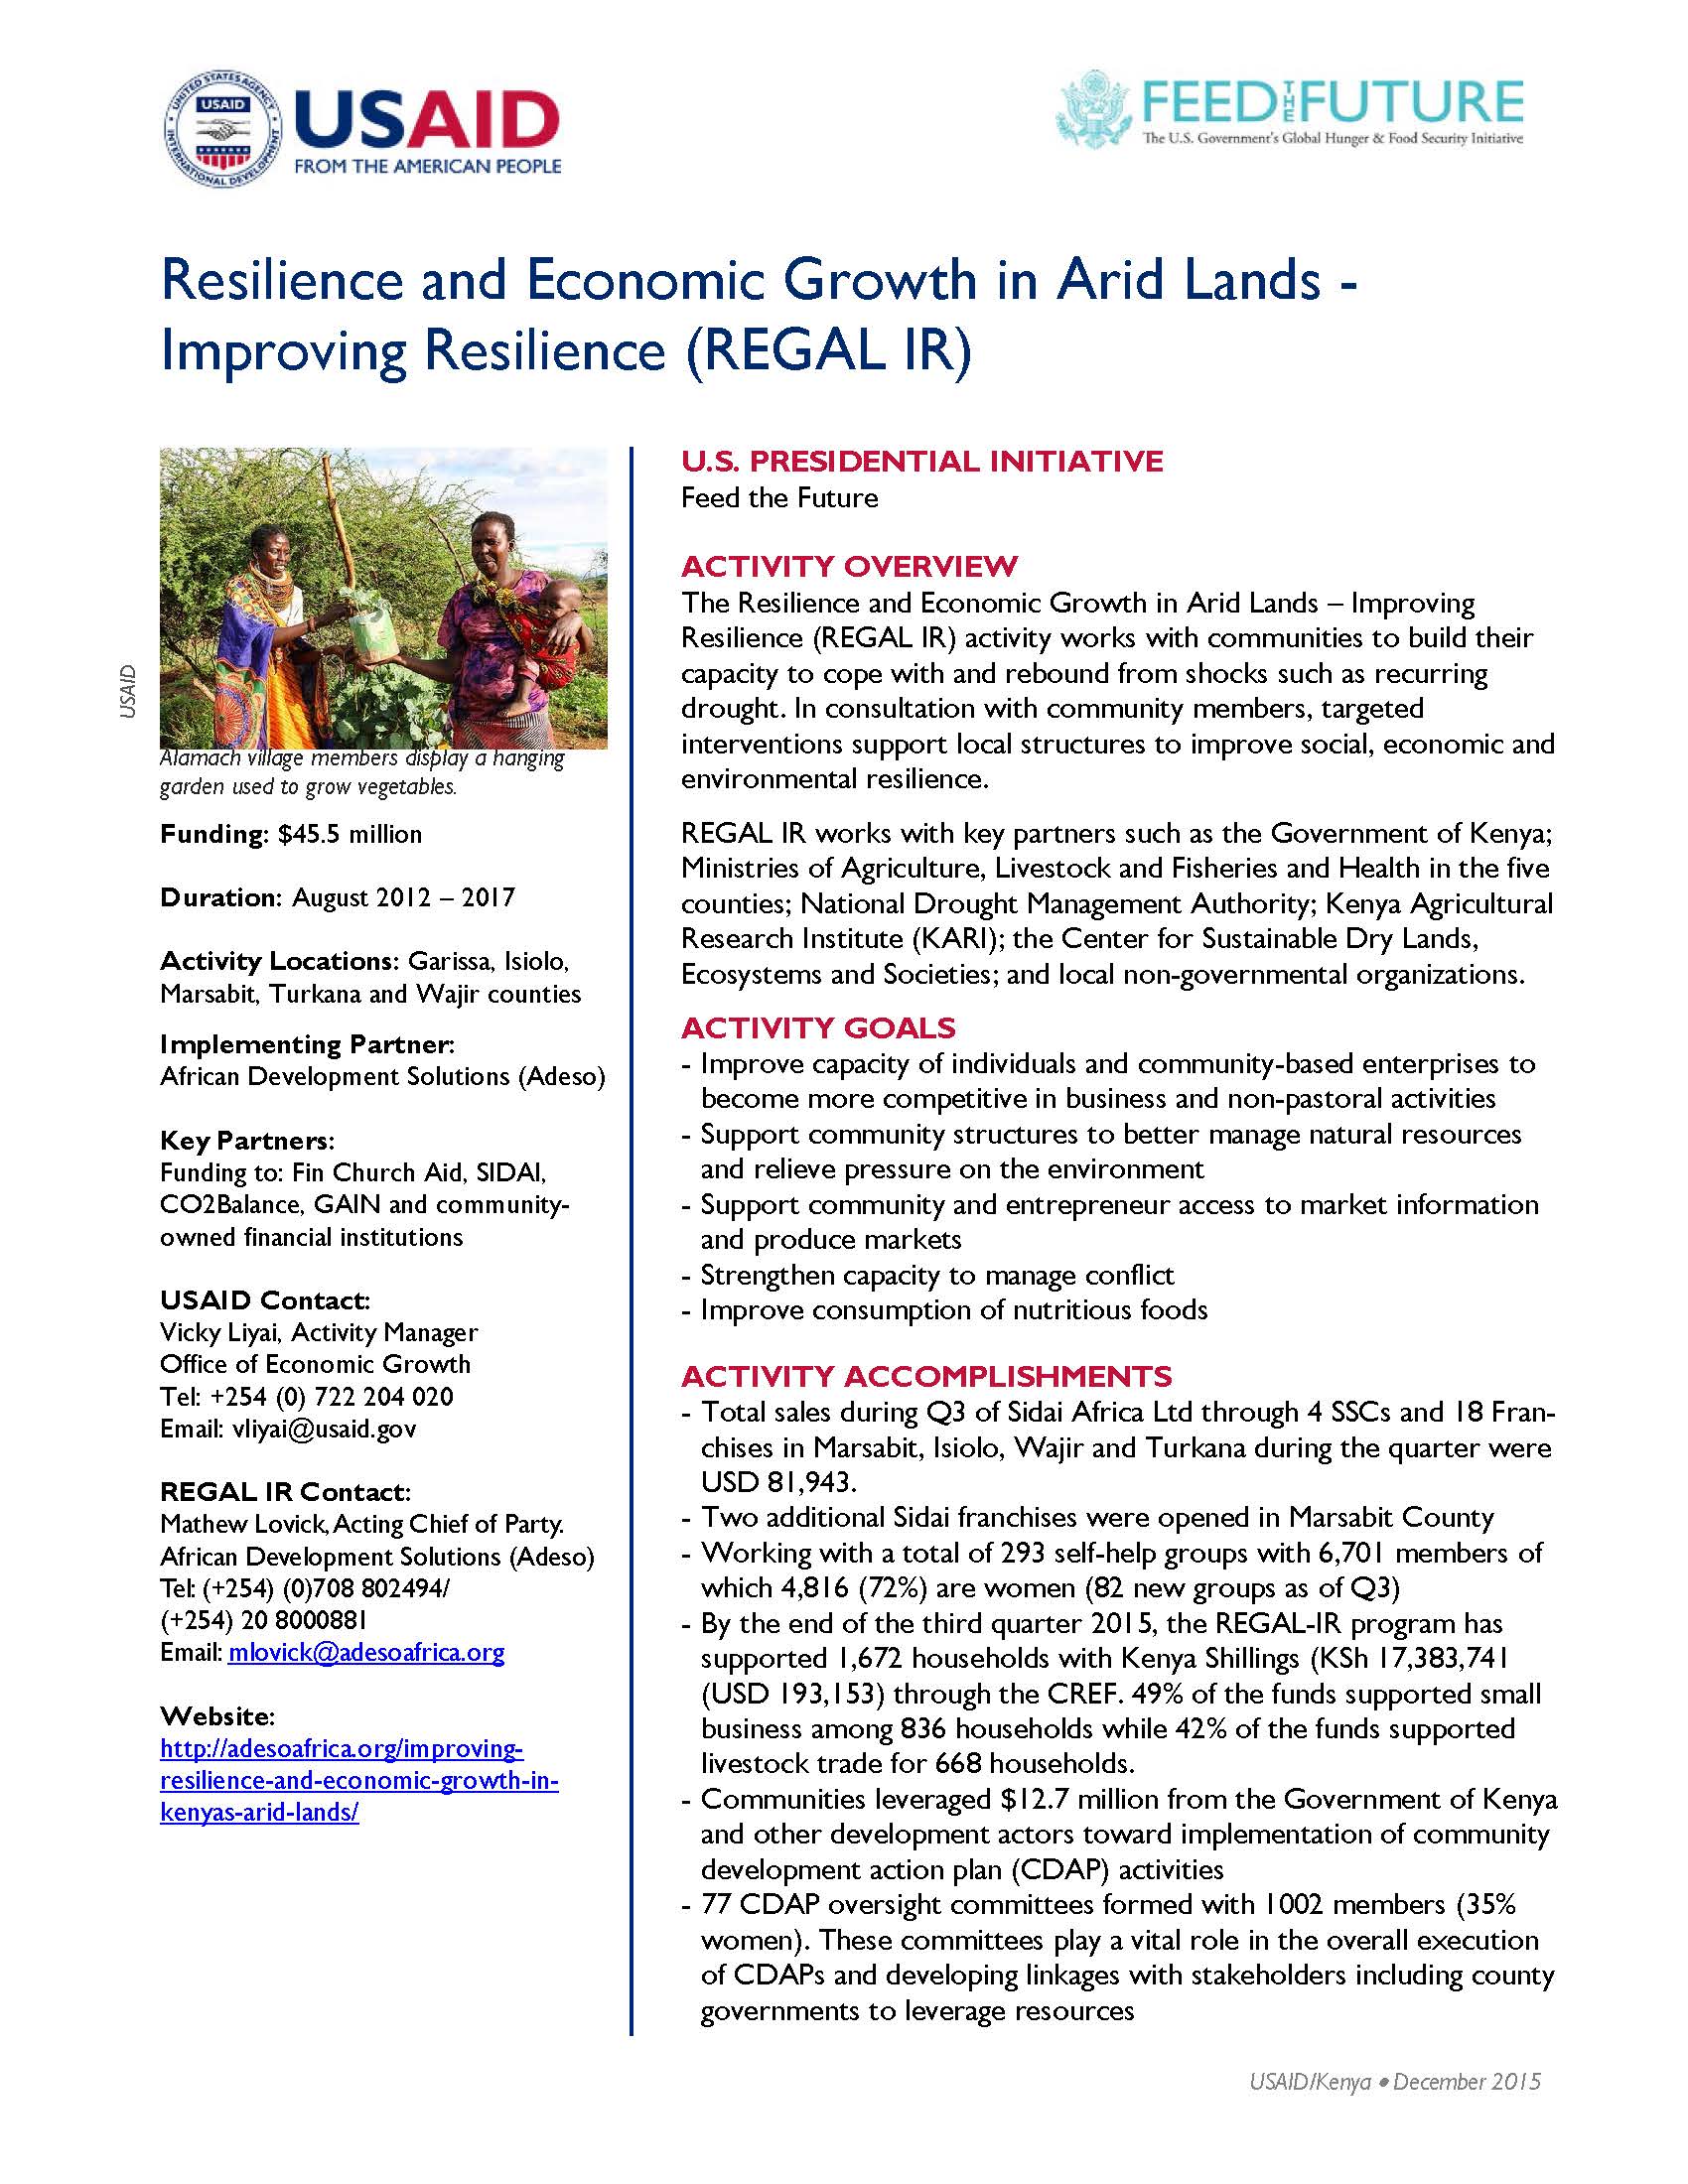 Resilience and Economic Growth in Arid Lands - Improving Resilience (REGAL IR)